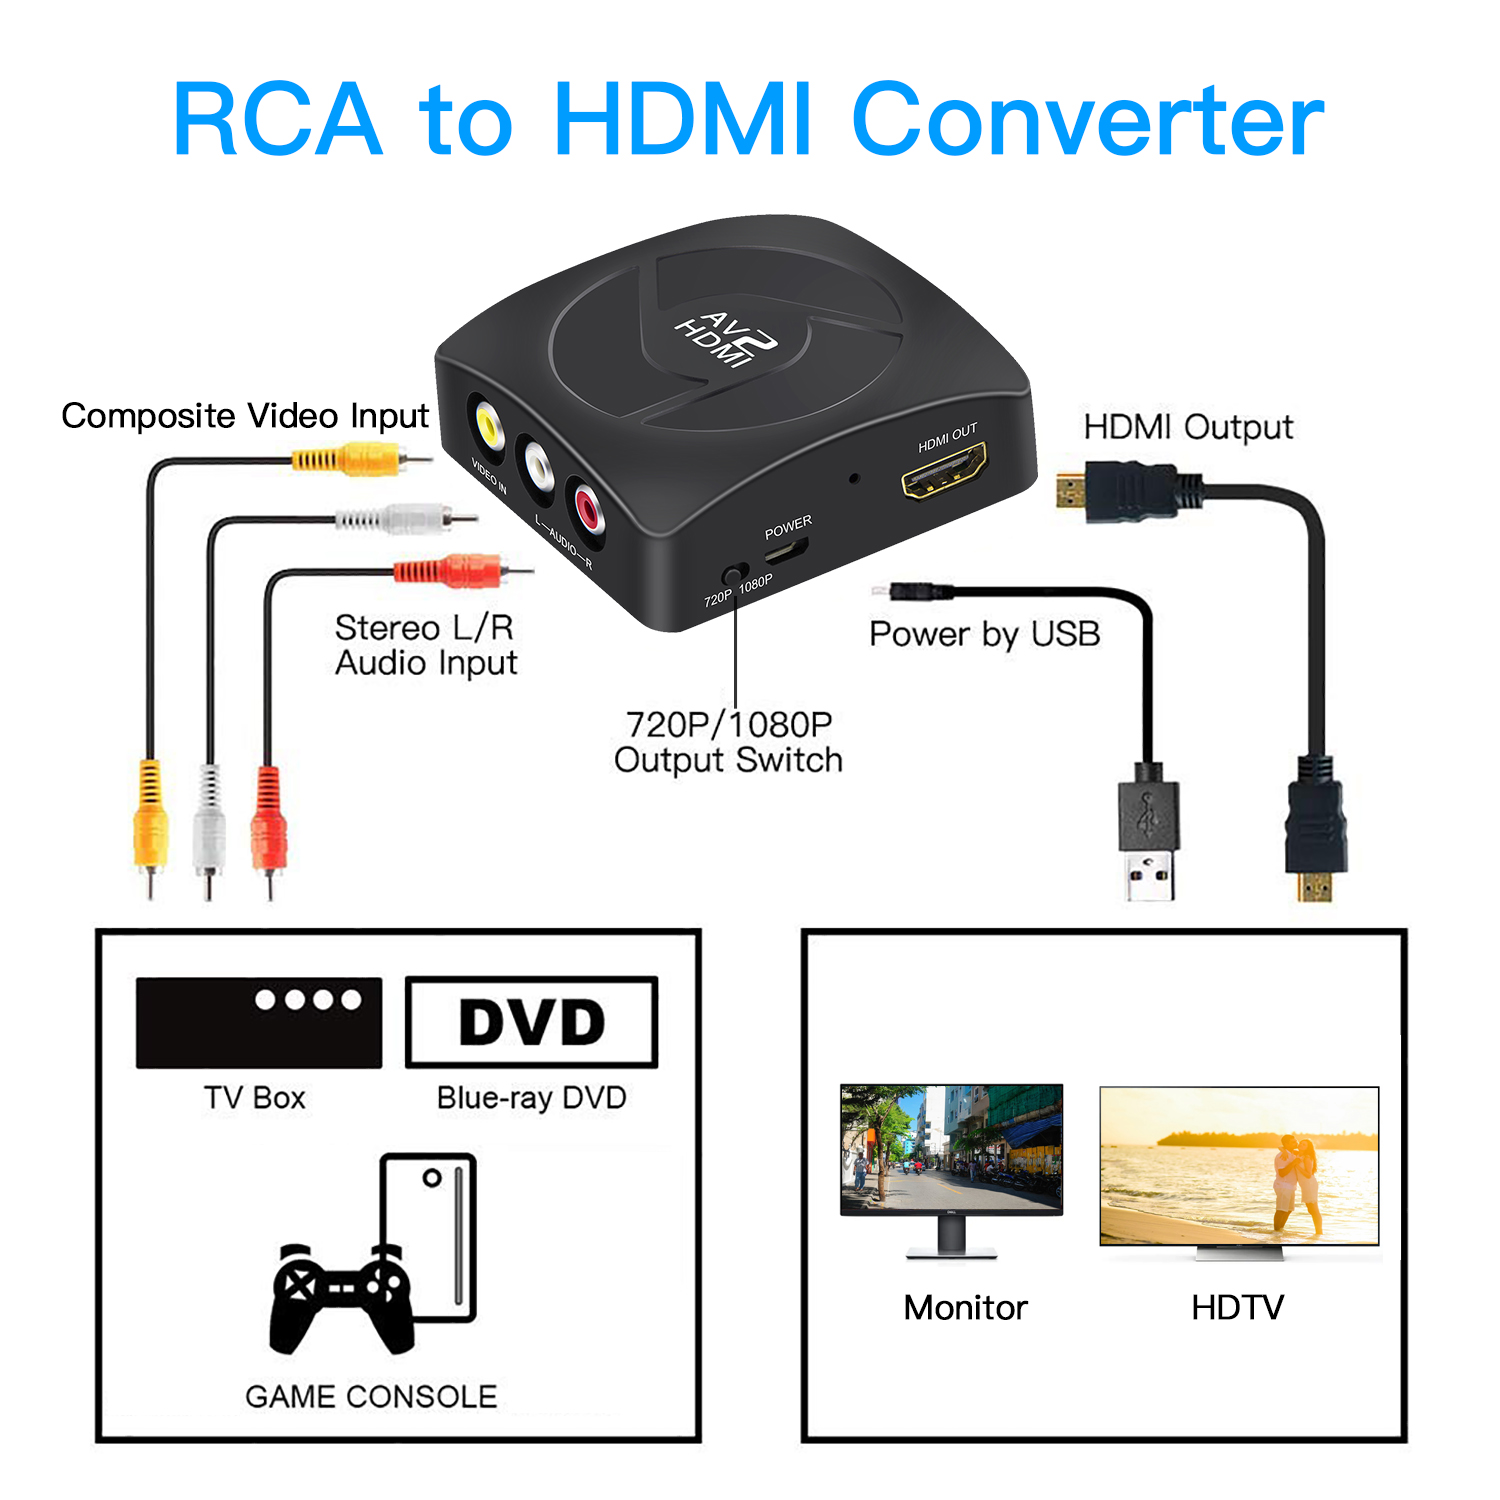 RCA to HDMI Converter, CVBS Composite AV to HDMI Converter, AV2HDMI Converter for PS2, N64, Wii, STB, VHS, VCR Camera, DVD(Includes HDMI and RCA cables) - image 4 of 6